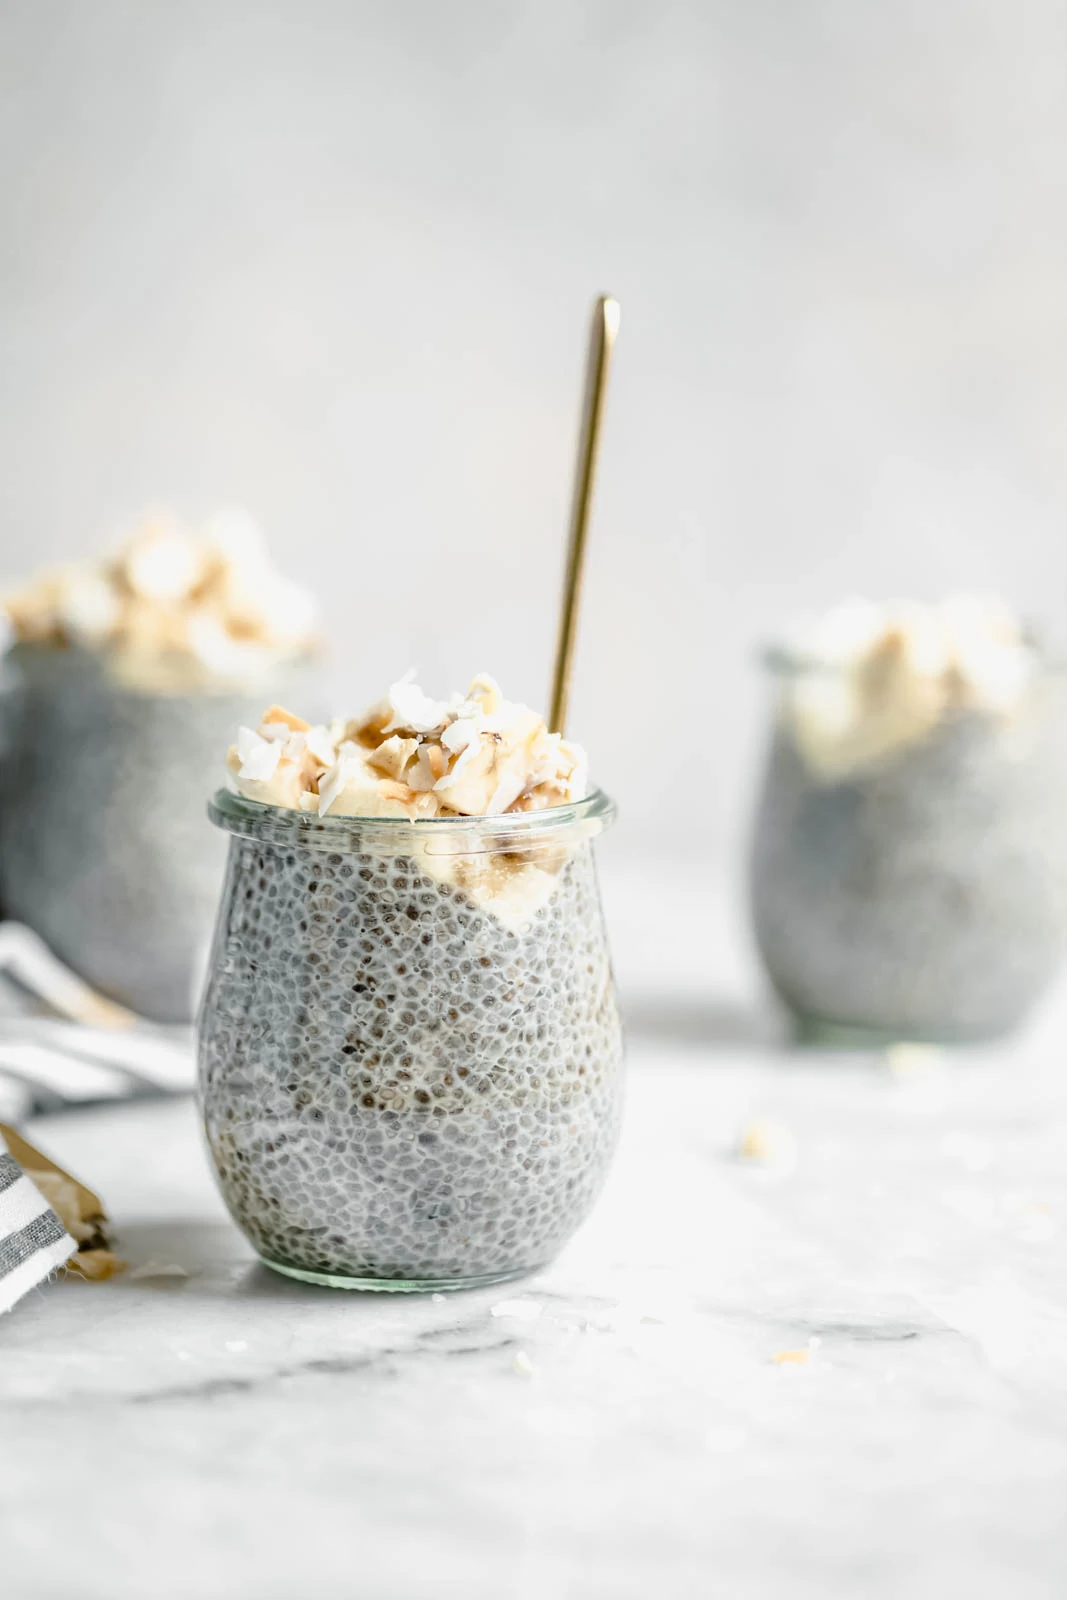 Creamy coconut chia pudding with spoon